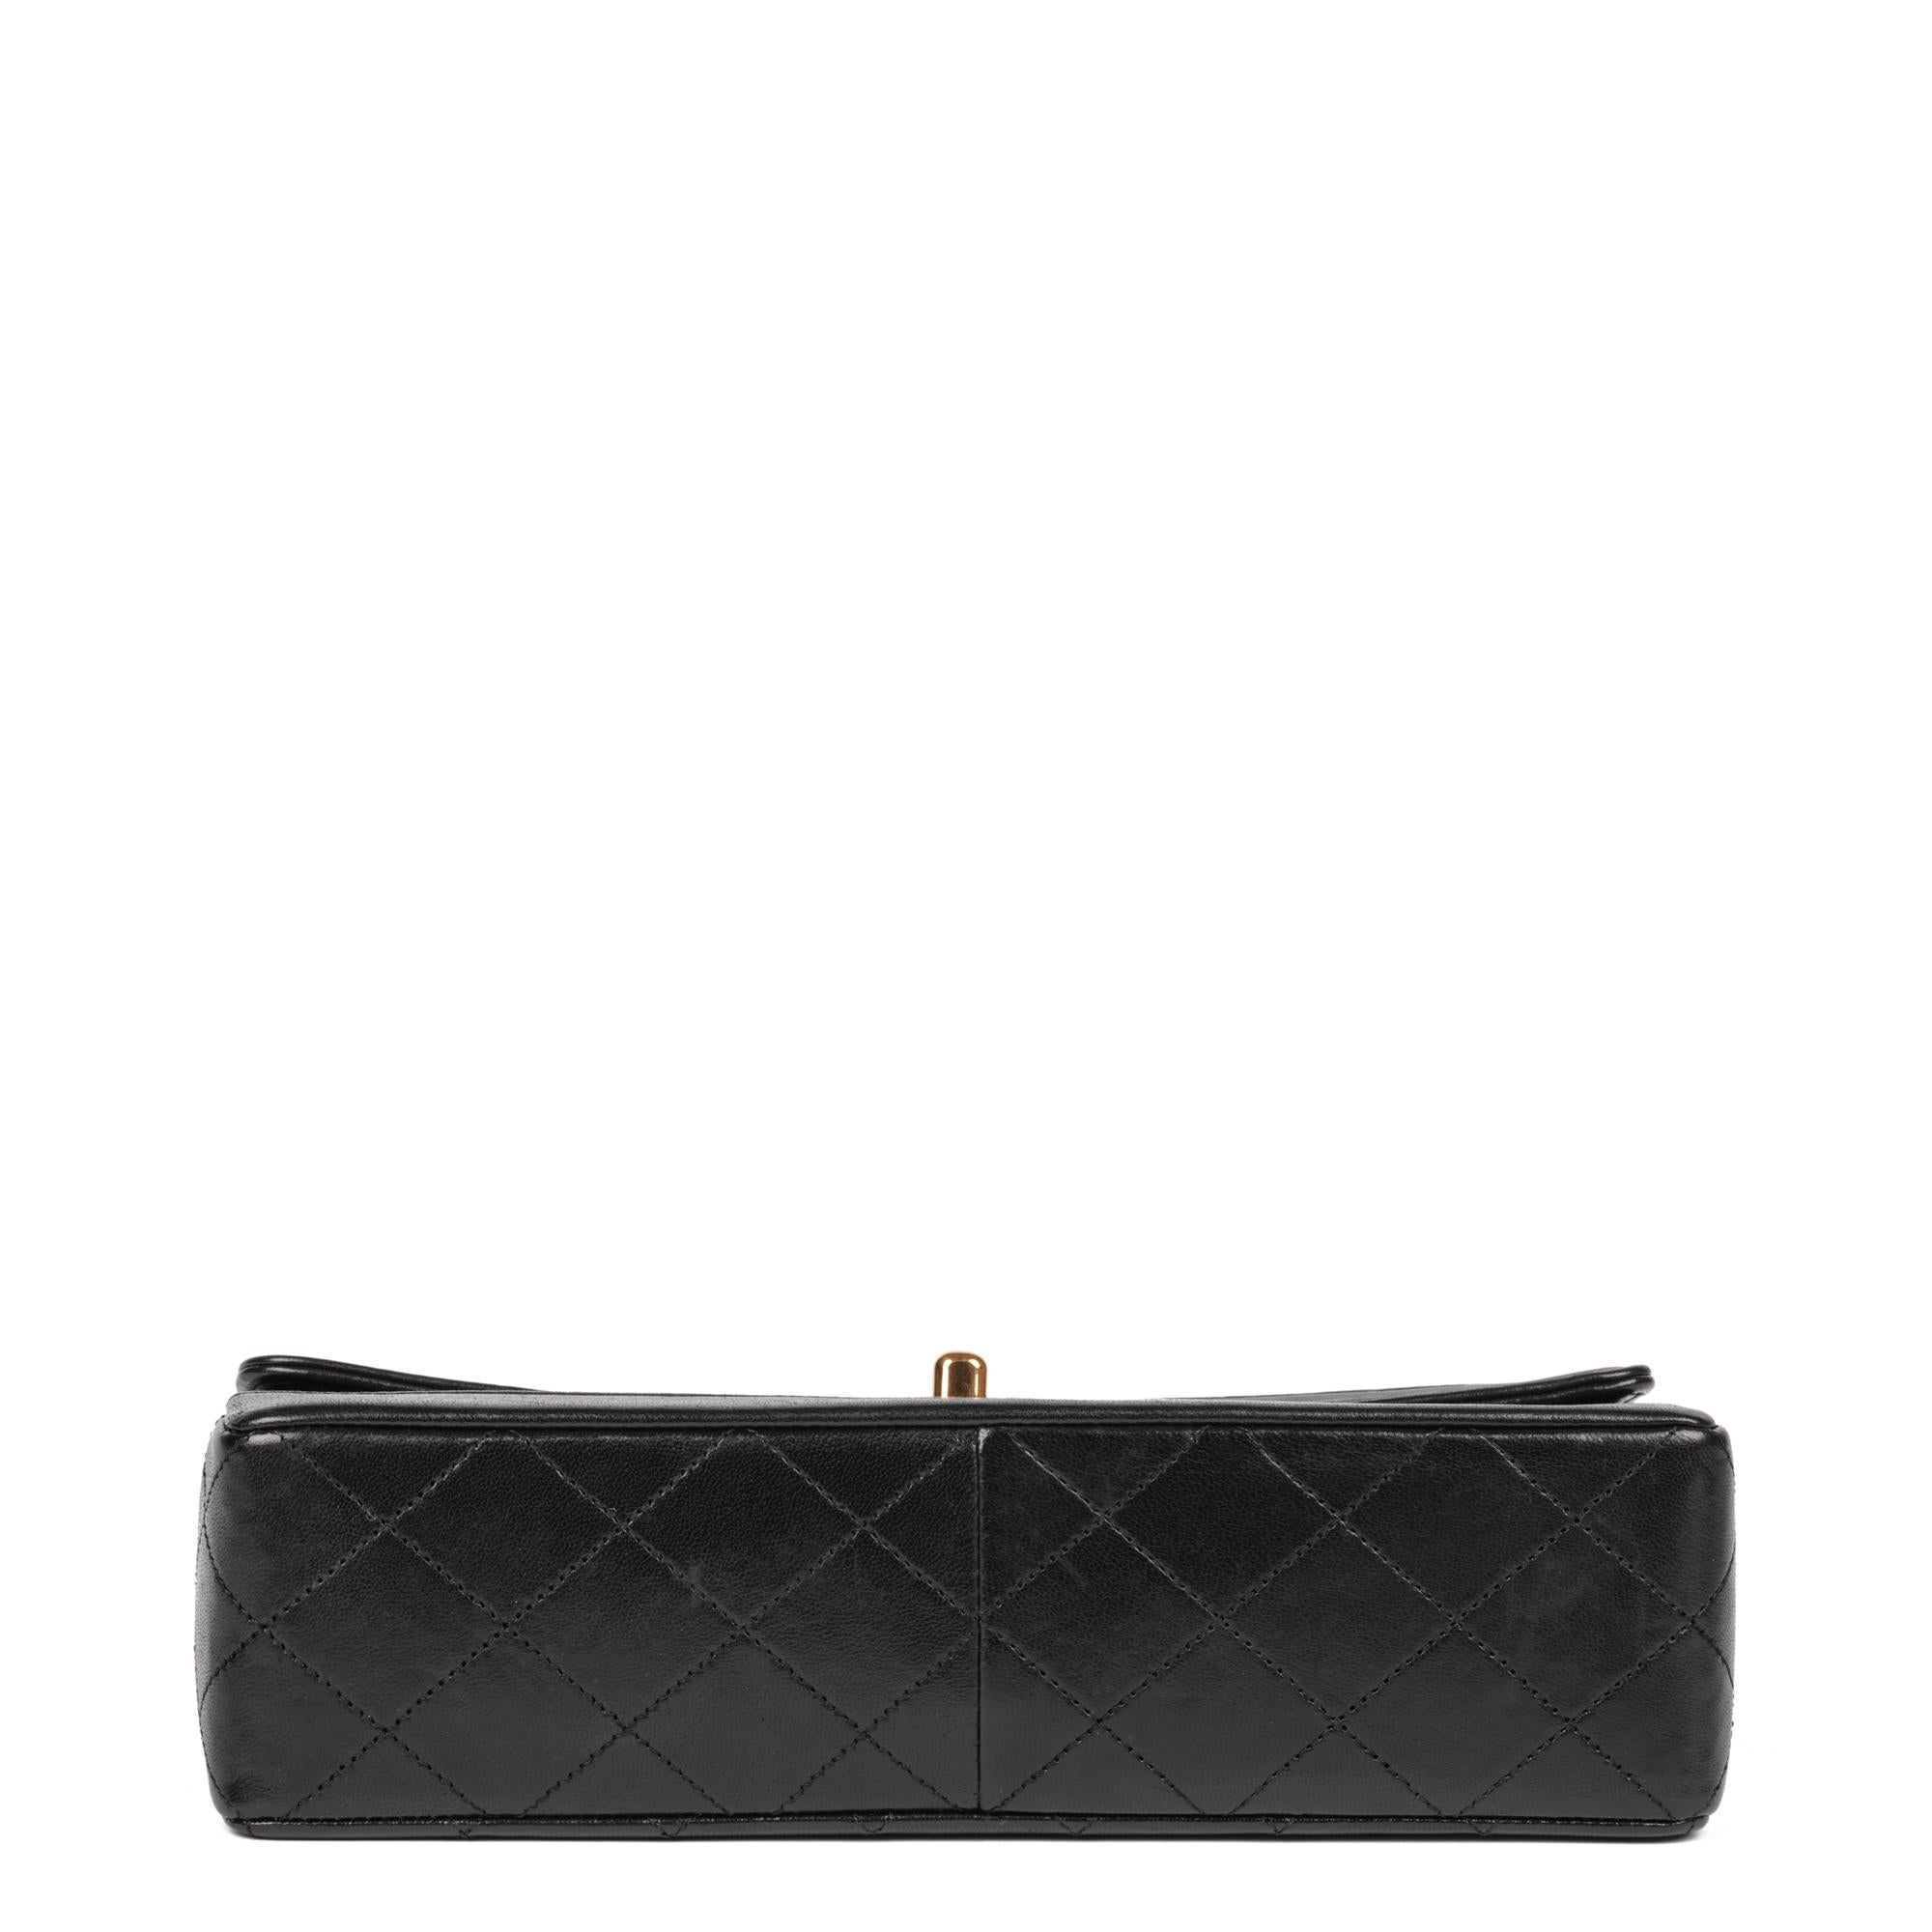 CHANEL Black Quilted Lambskin Vintage Medium Classic Single Flap Bag with Wallet For Sale 1